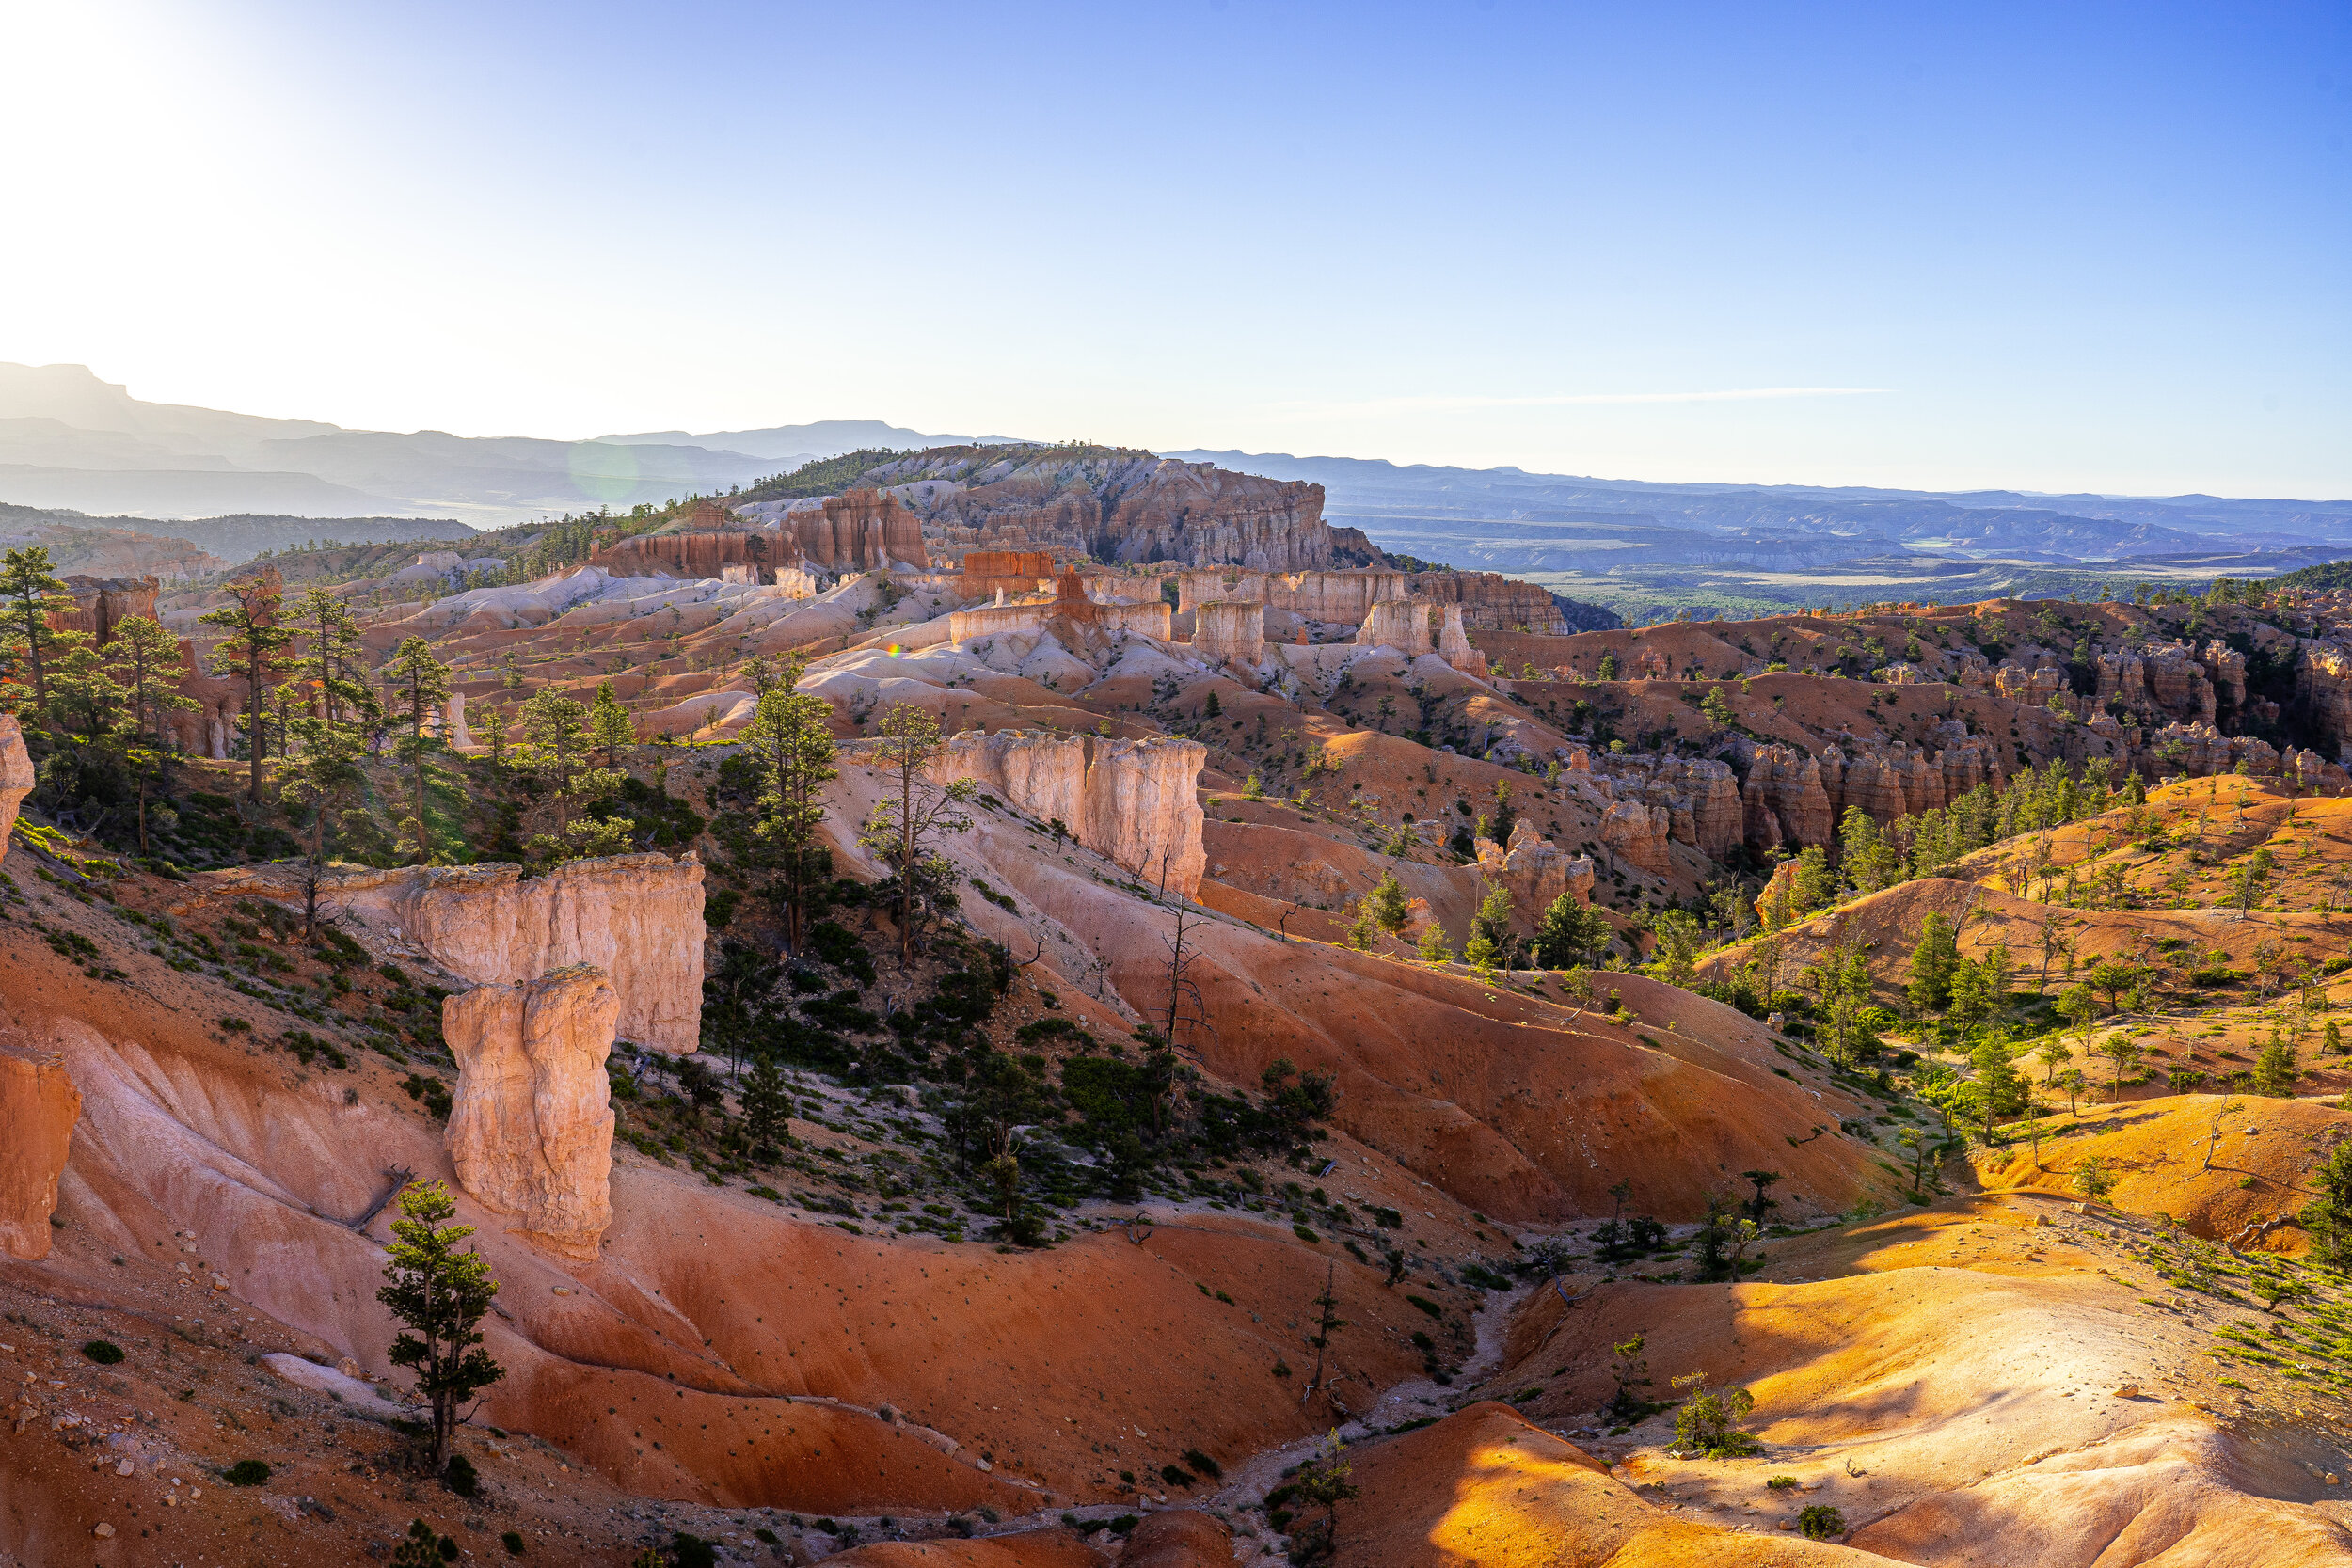  The Bryce Canyon area was settled by Mormon pioneers in the  1850s  and was named after Ebenezer Bryce, who homesteaded in the area. Bryce Canyon was designated a national park by Congress in 1928. Craig took this beautiful picture of the Canyon.  